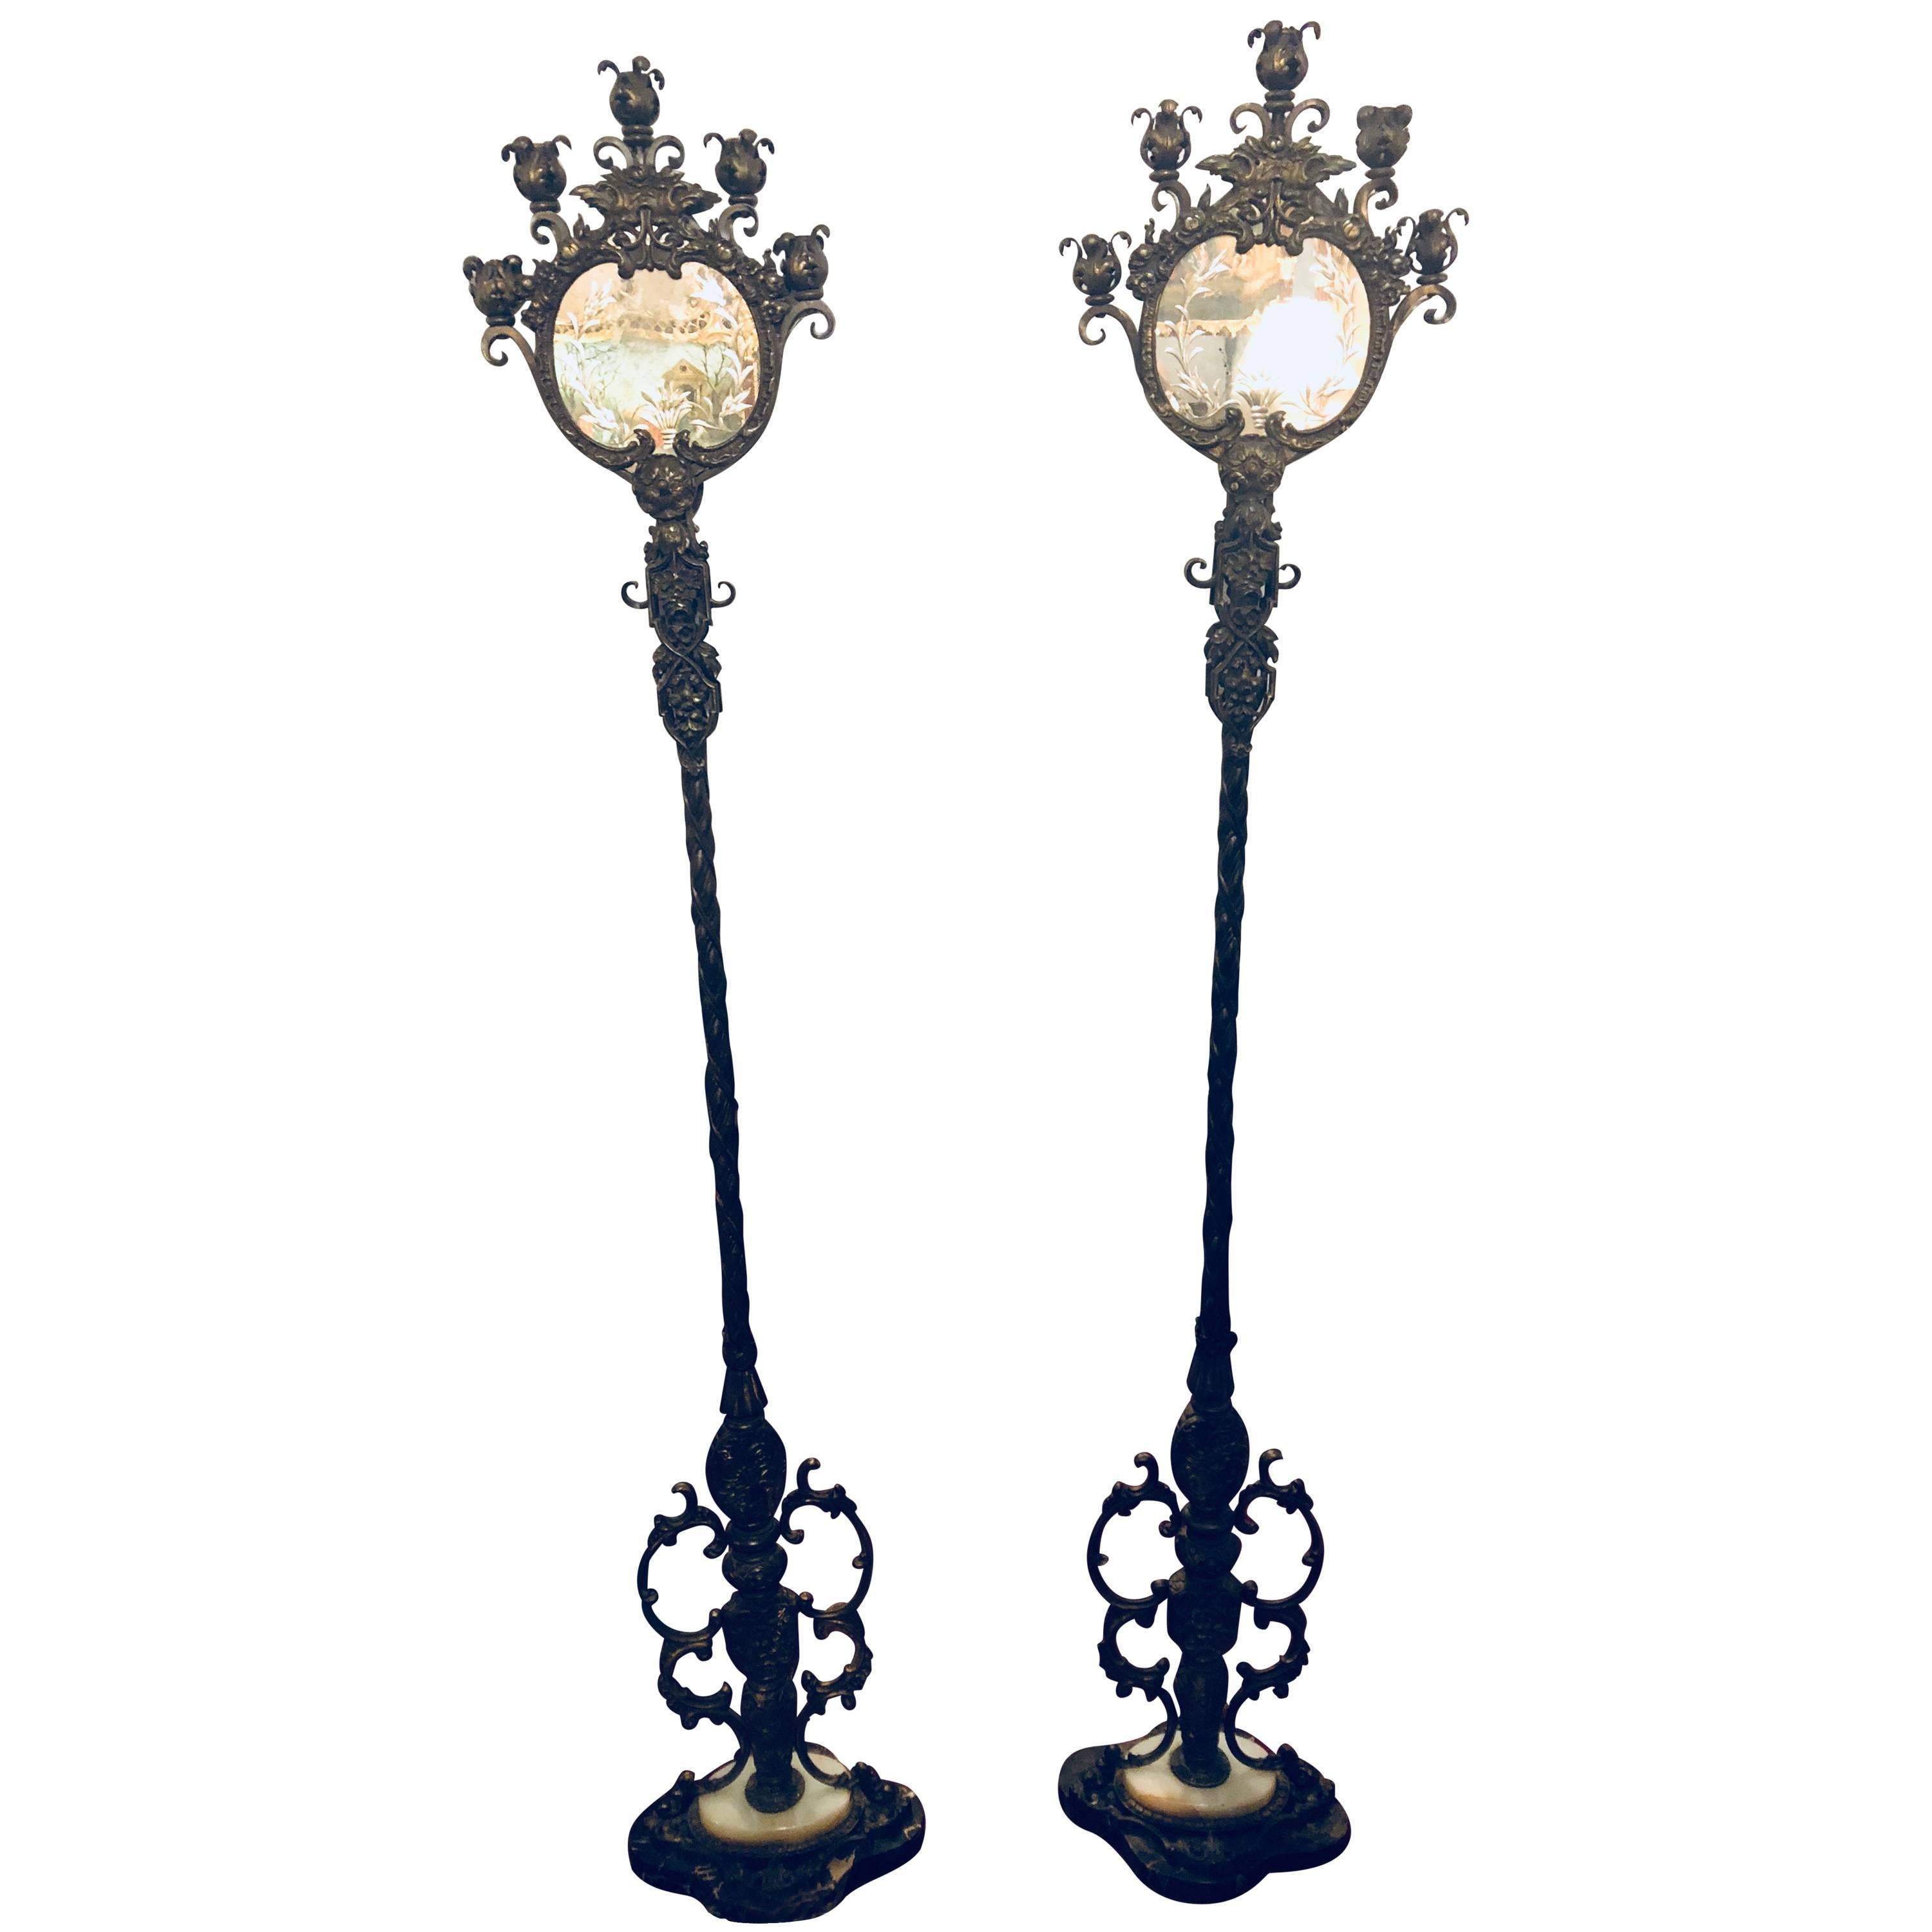 Pair of Oscar Bach Style Five Light Standing Double Reverse Candelabra Lamps